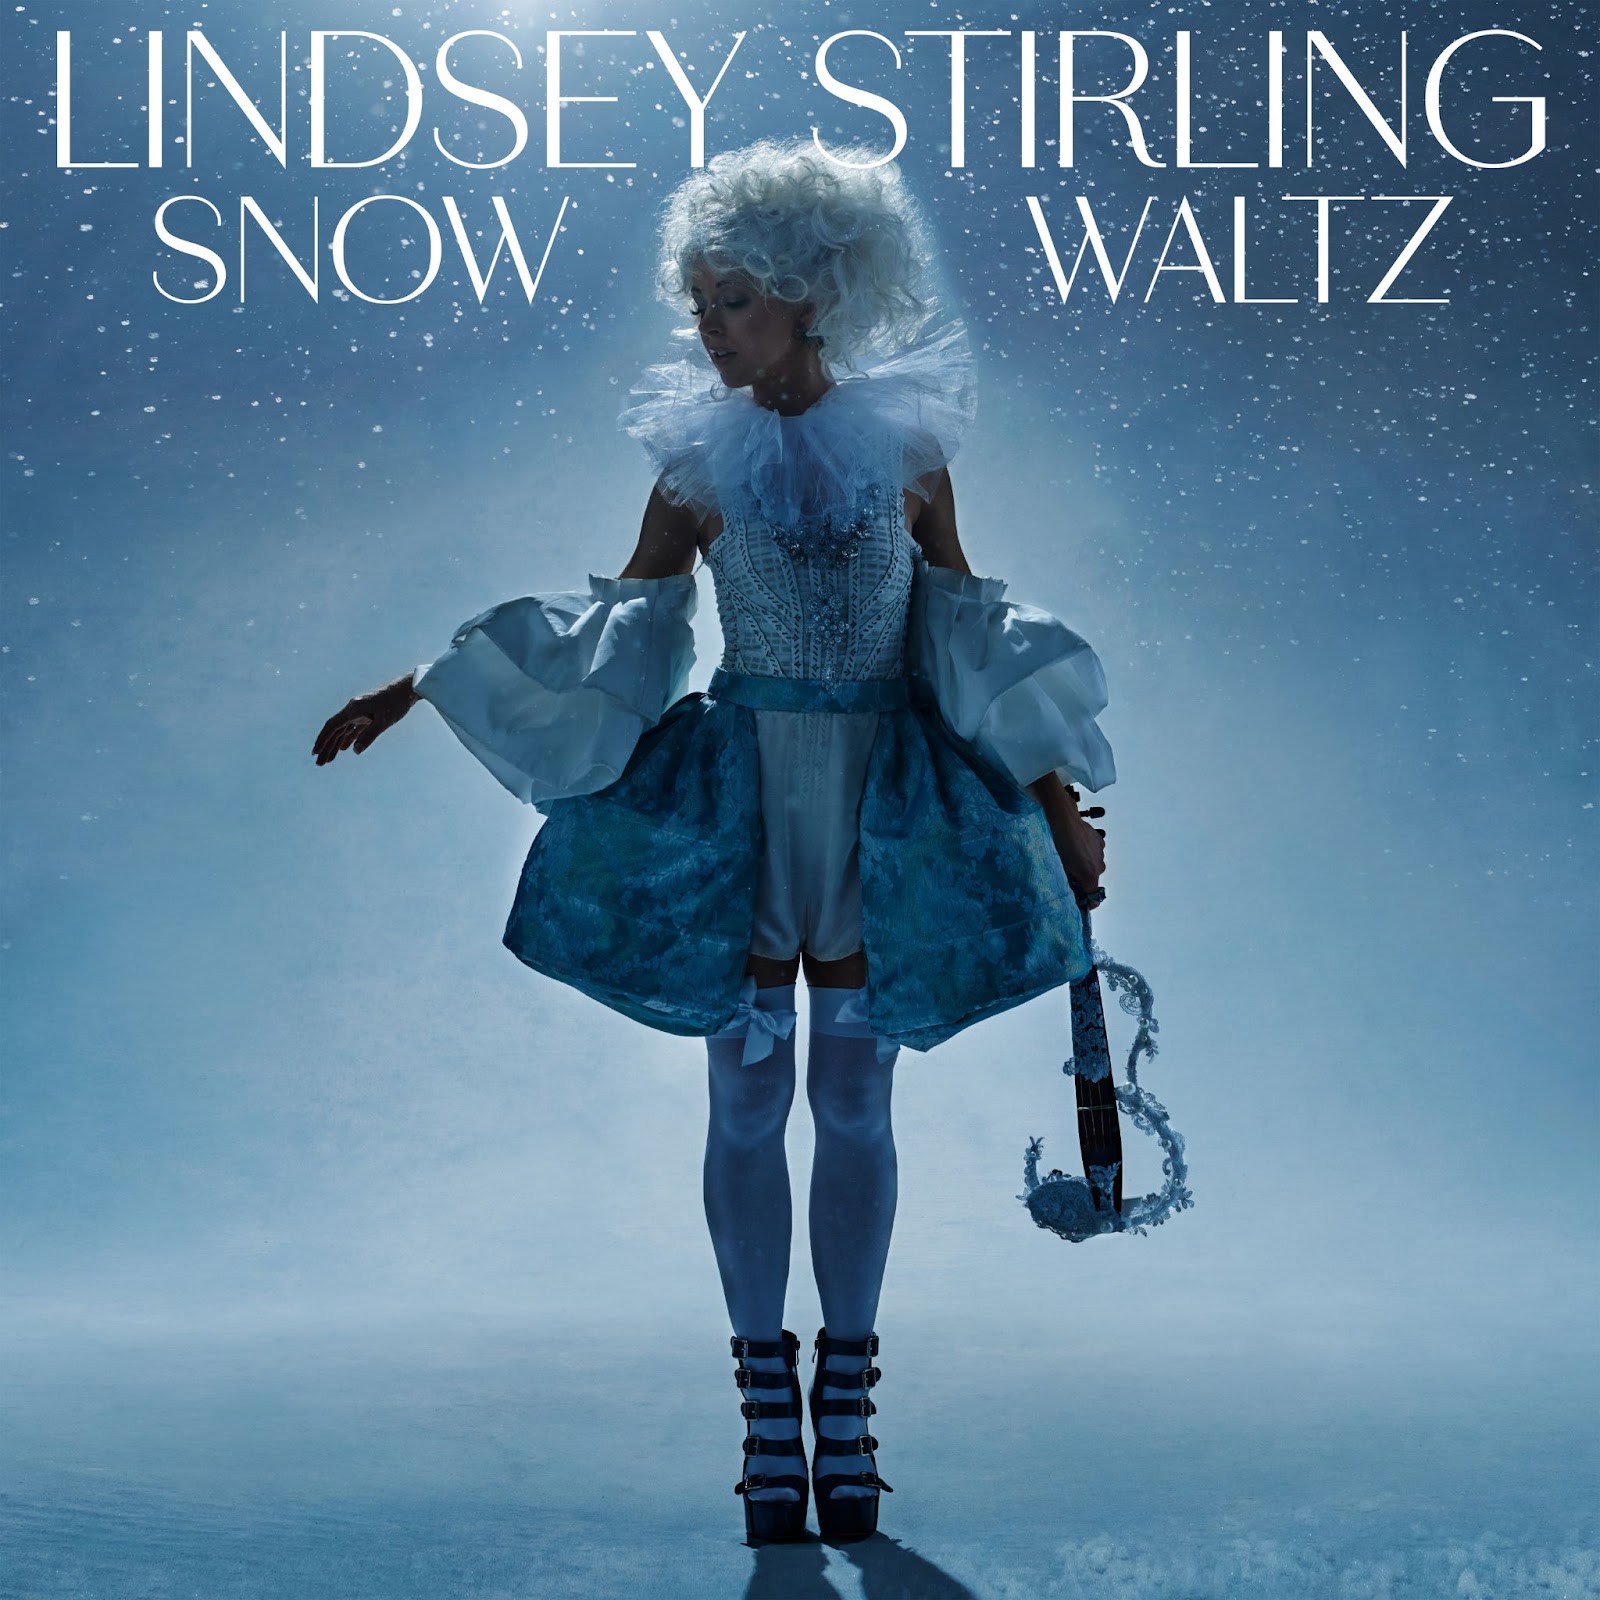 Singer, dancer, violinist extraordinaire - and occasional Hallmark Channel cameo - Lindsey Stirling returns to Buffalo on Dec. 12 with her `Snow Waltz` tour. (Image by Cara Robbins // courtesy of Shore Fire Media)